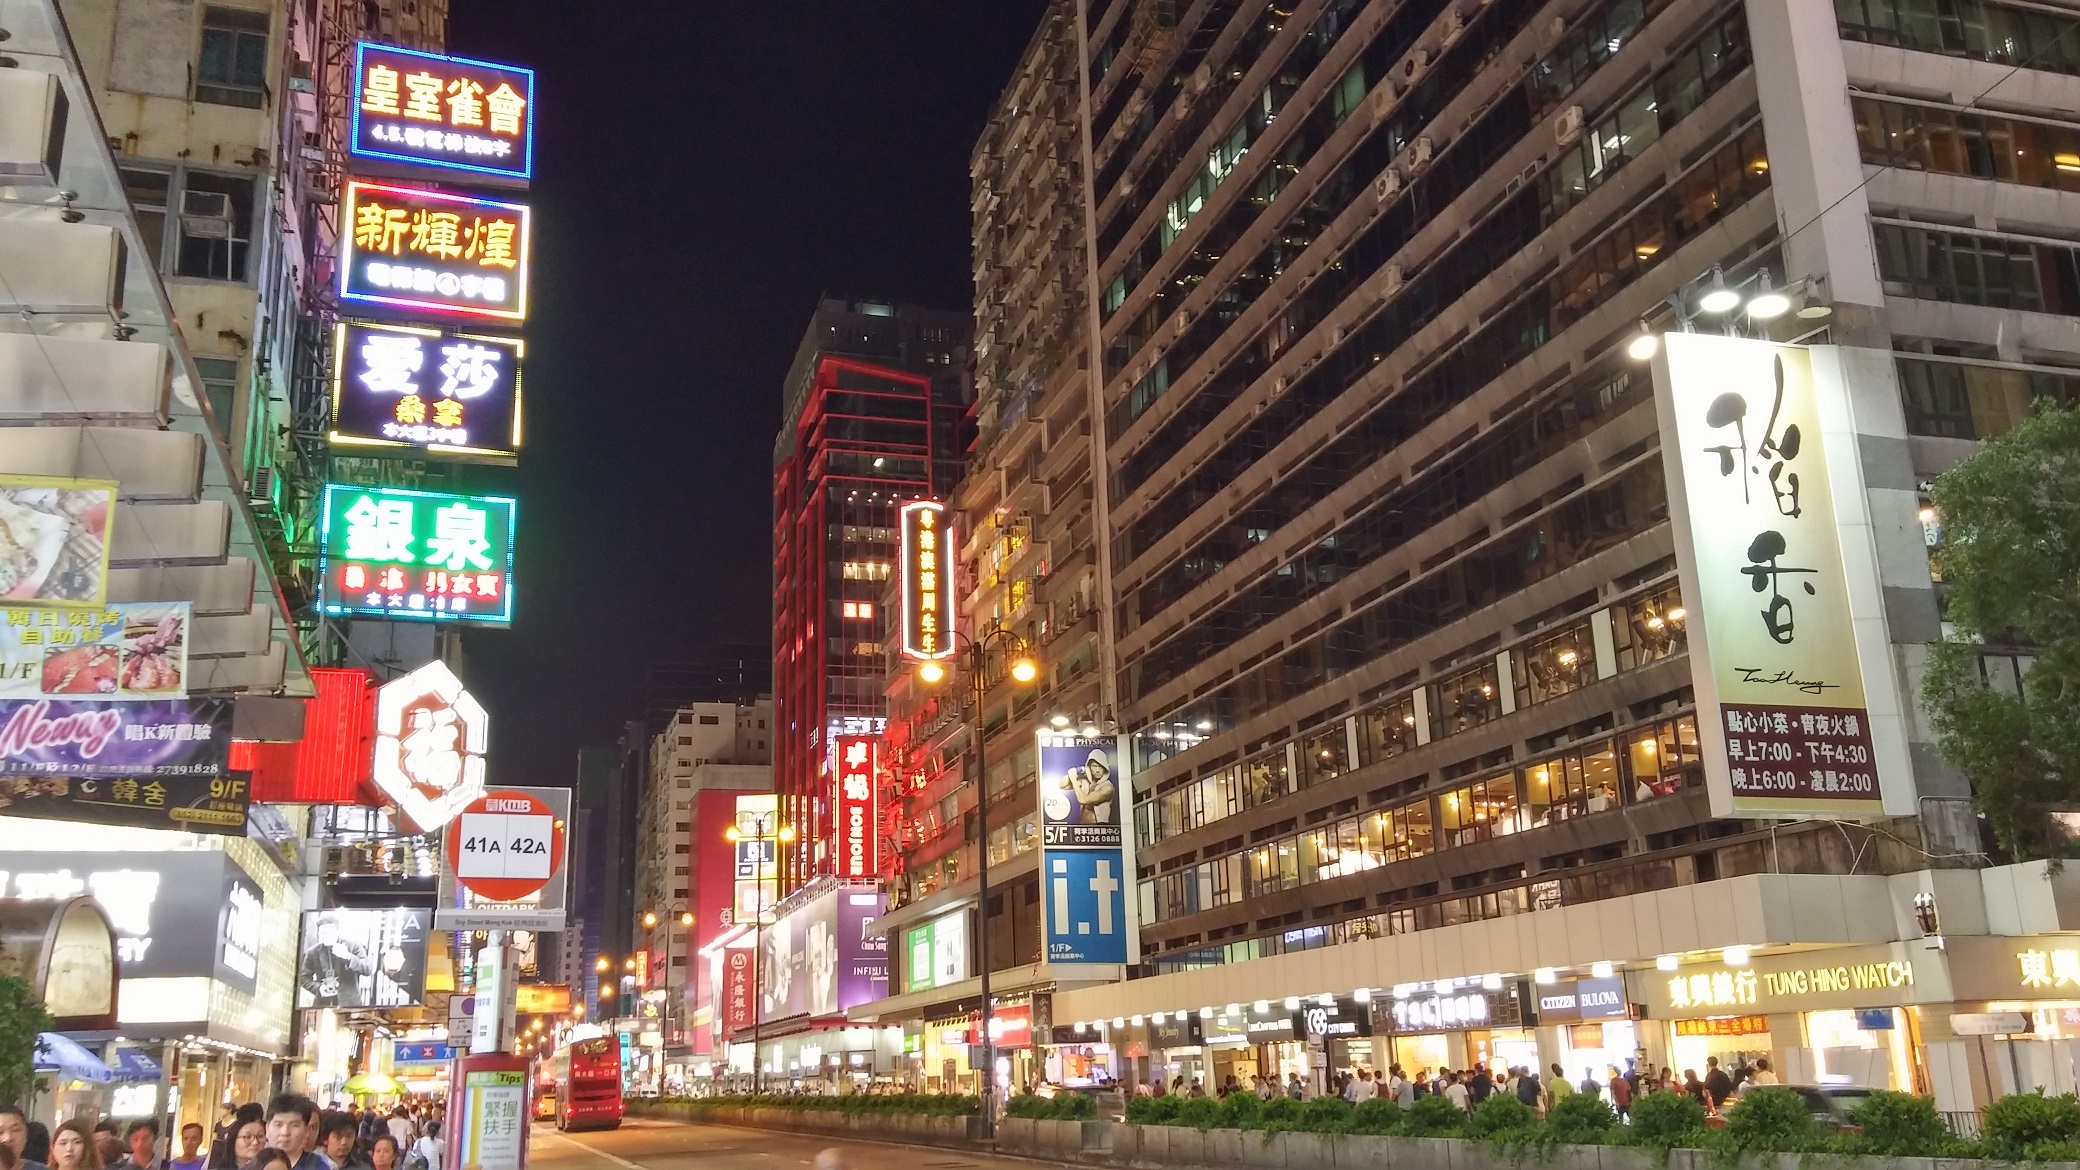 How many colorful signboards are there in Hong Kong?